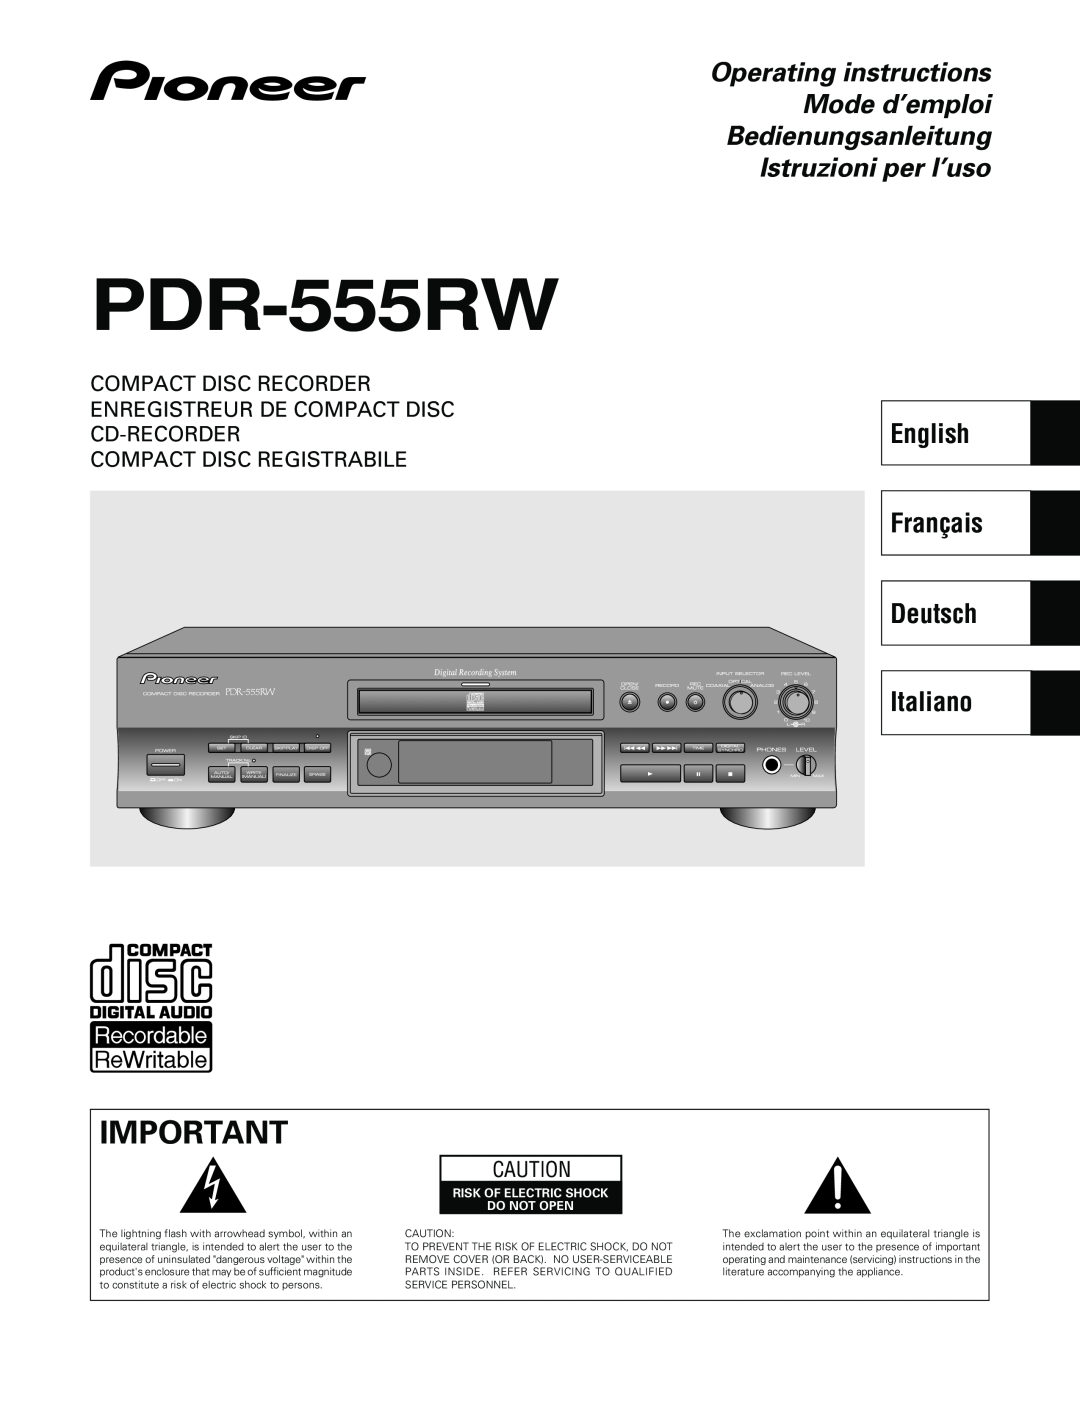 Pioneer PDR-555RW operating instructions English, Français Deutsch Italiano, Compact Disc Registrabile 